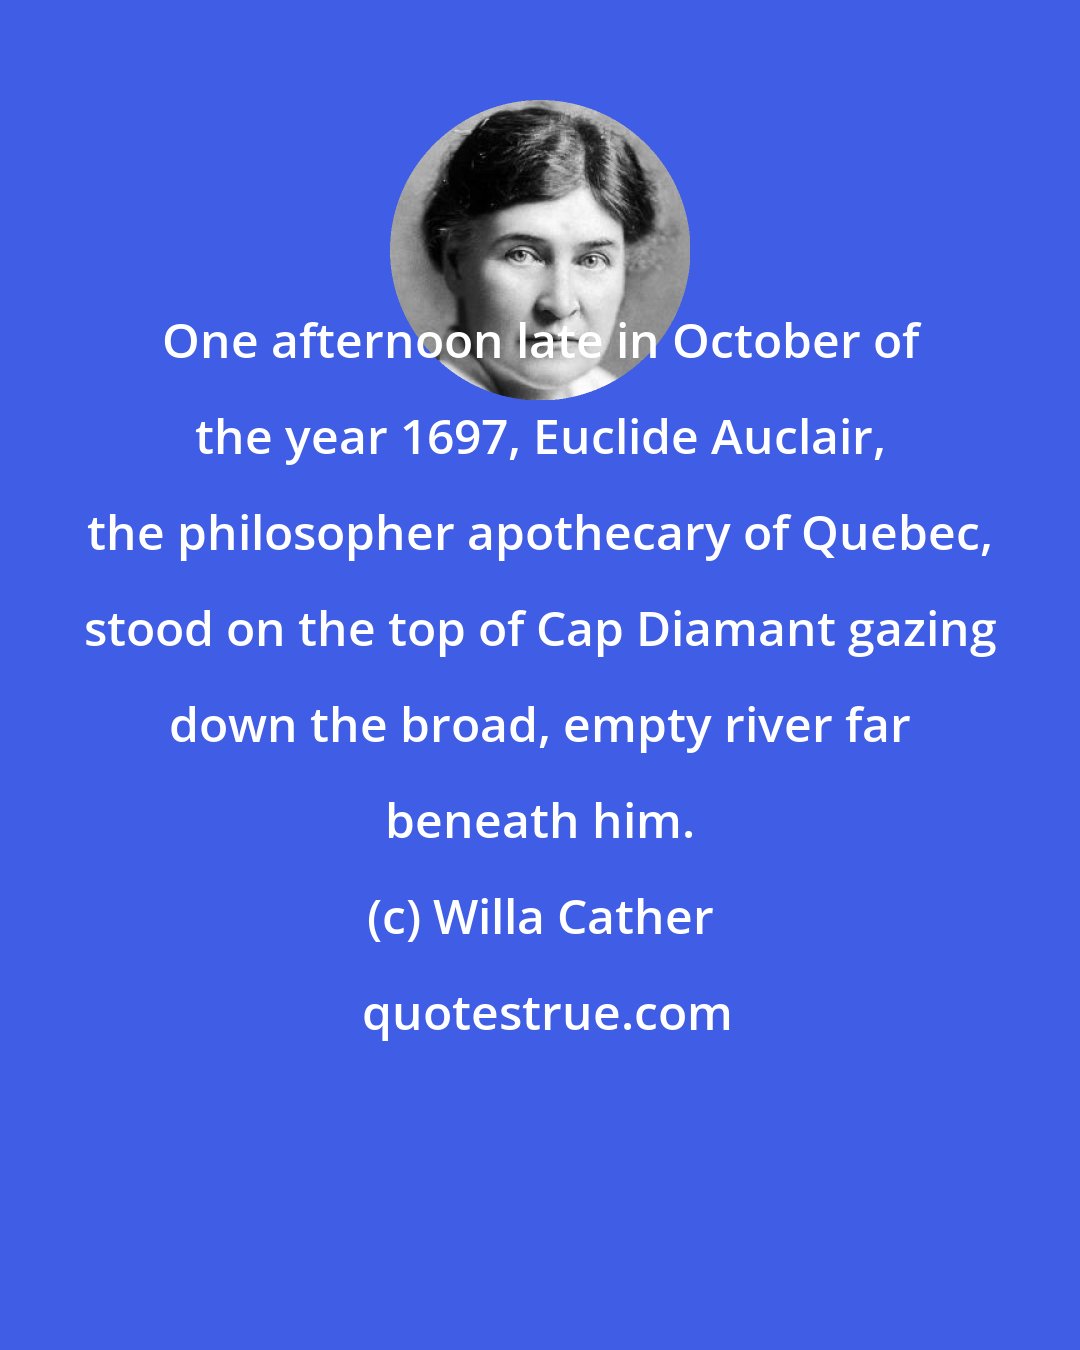 Willa Cather: One afternoon late in October of the year 1697, Euclide Auclair, the philosopher apothecary of Quebec, stood on the top of Cap Diamant gazing down the broad, empty river far beneath him.